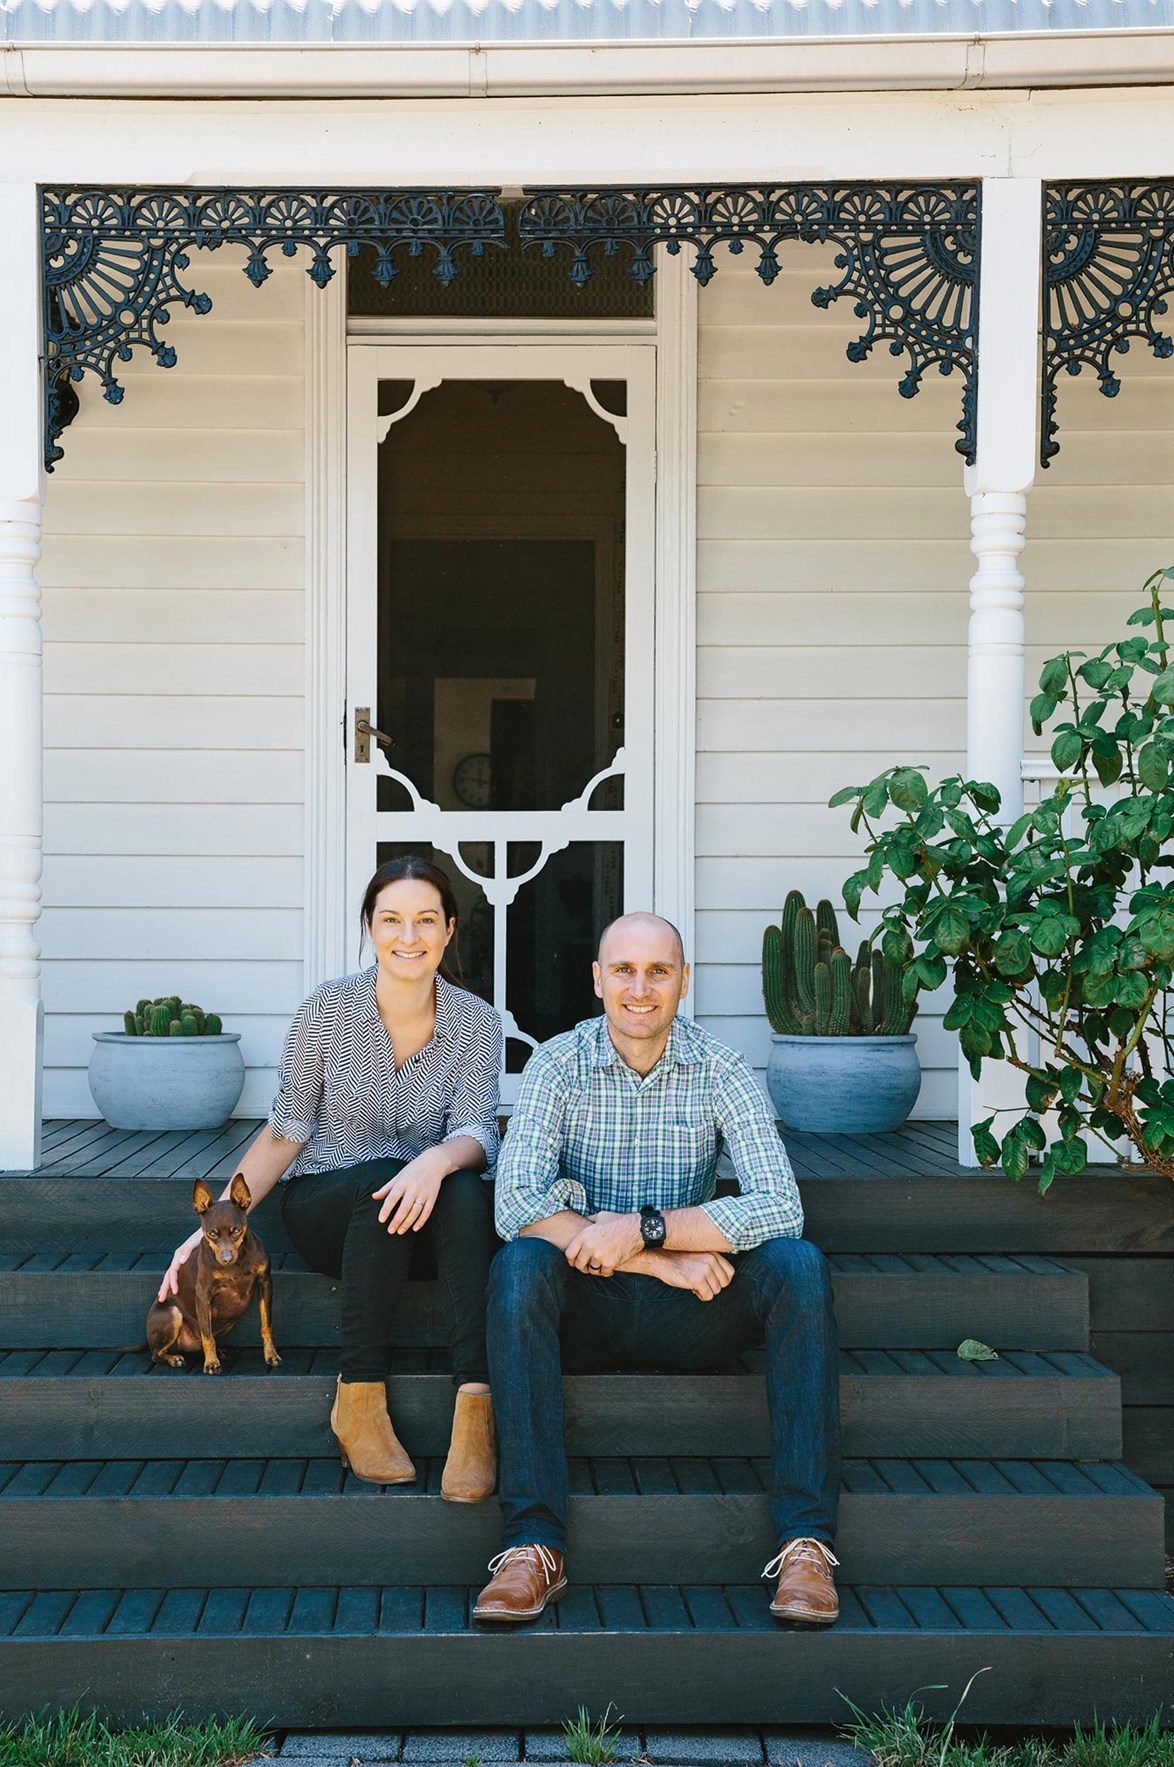 For photographer Marnie Hawson and her husband Ryan (and their miniature pinscher, Dexter), moving into a [weatherboard cottage in the Macedon Ranges](https://www.homestolove.com.au/treechange-trading-city-life-for-a-cottage-in-the-mountains-13773|target="_blank") was less of a 'tree-change' and more of a 'tree homecoming.' After so many years spent travelling while based in Melbourne, they began to yearn for a home to nest in. What better place to look than regional Victoria where they both grew up? Now they live in a beautifully styled home filled with vintage, recycled and sentimental furniture. *Photo: Marnie Hawson*